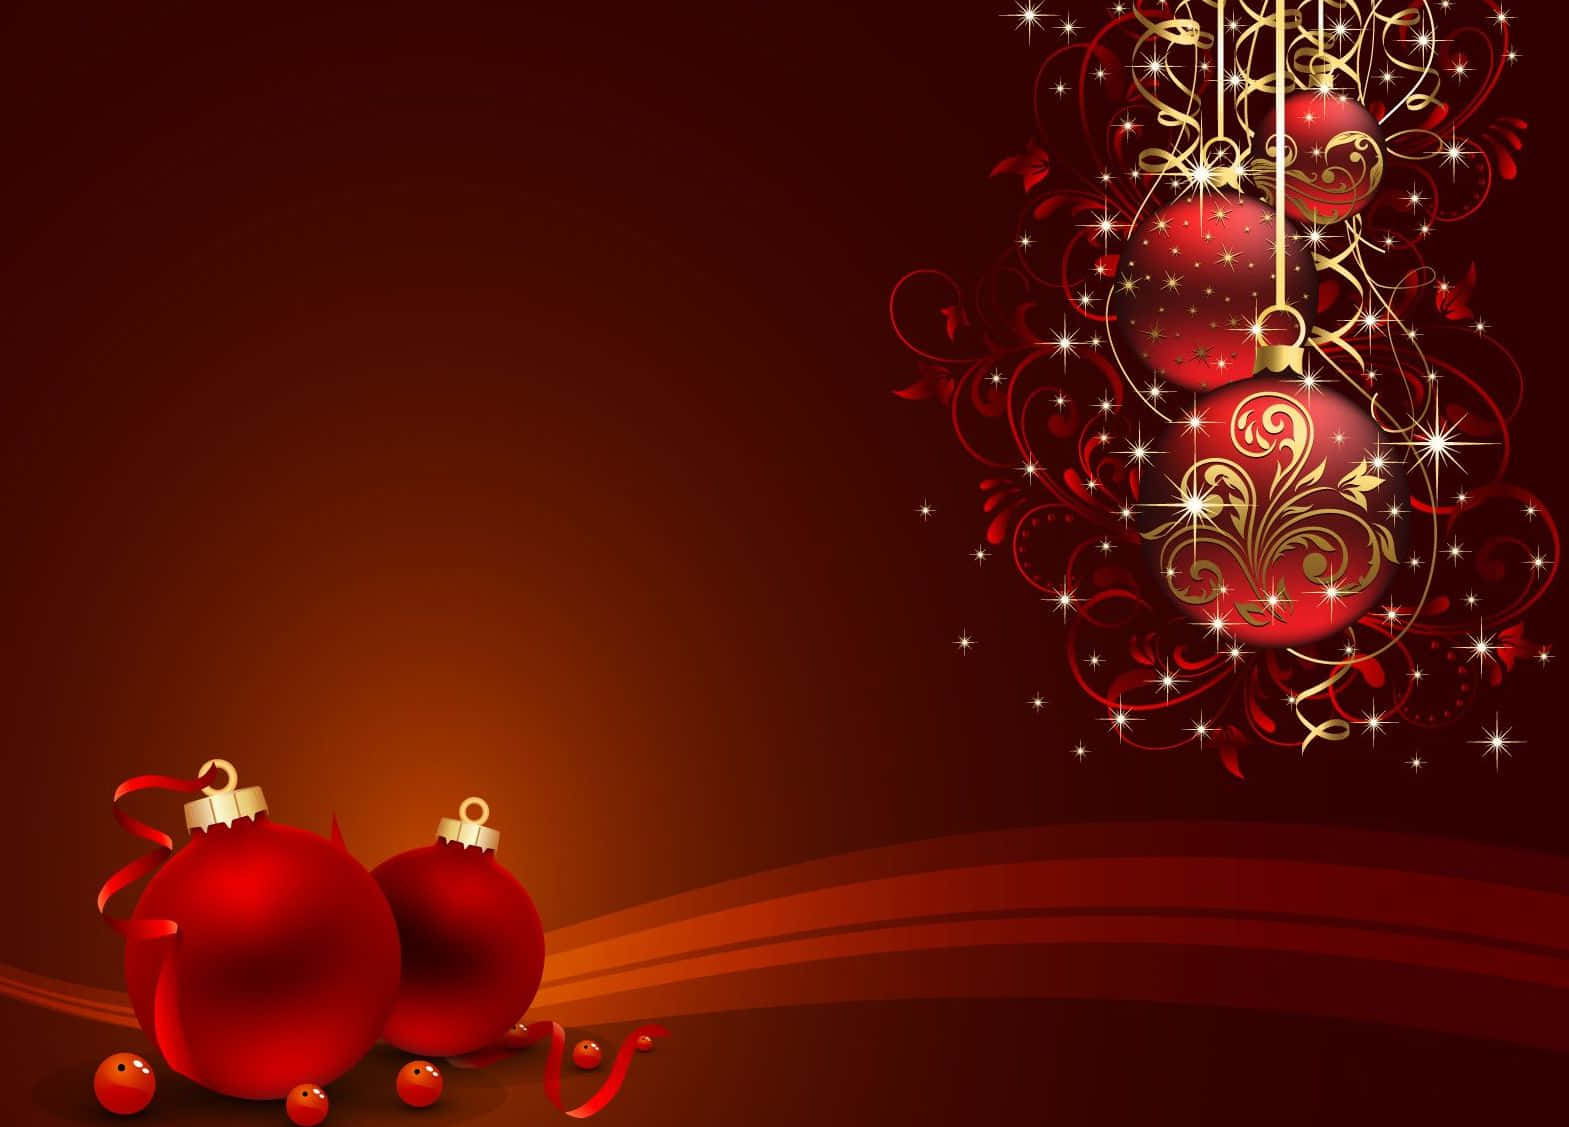 Bring the festivity to your holiday season with this beautiful Christmas Red Background